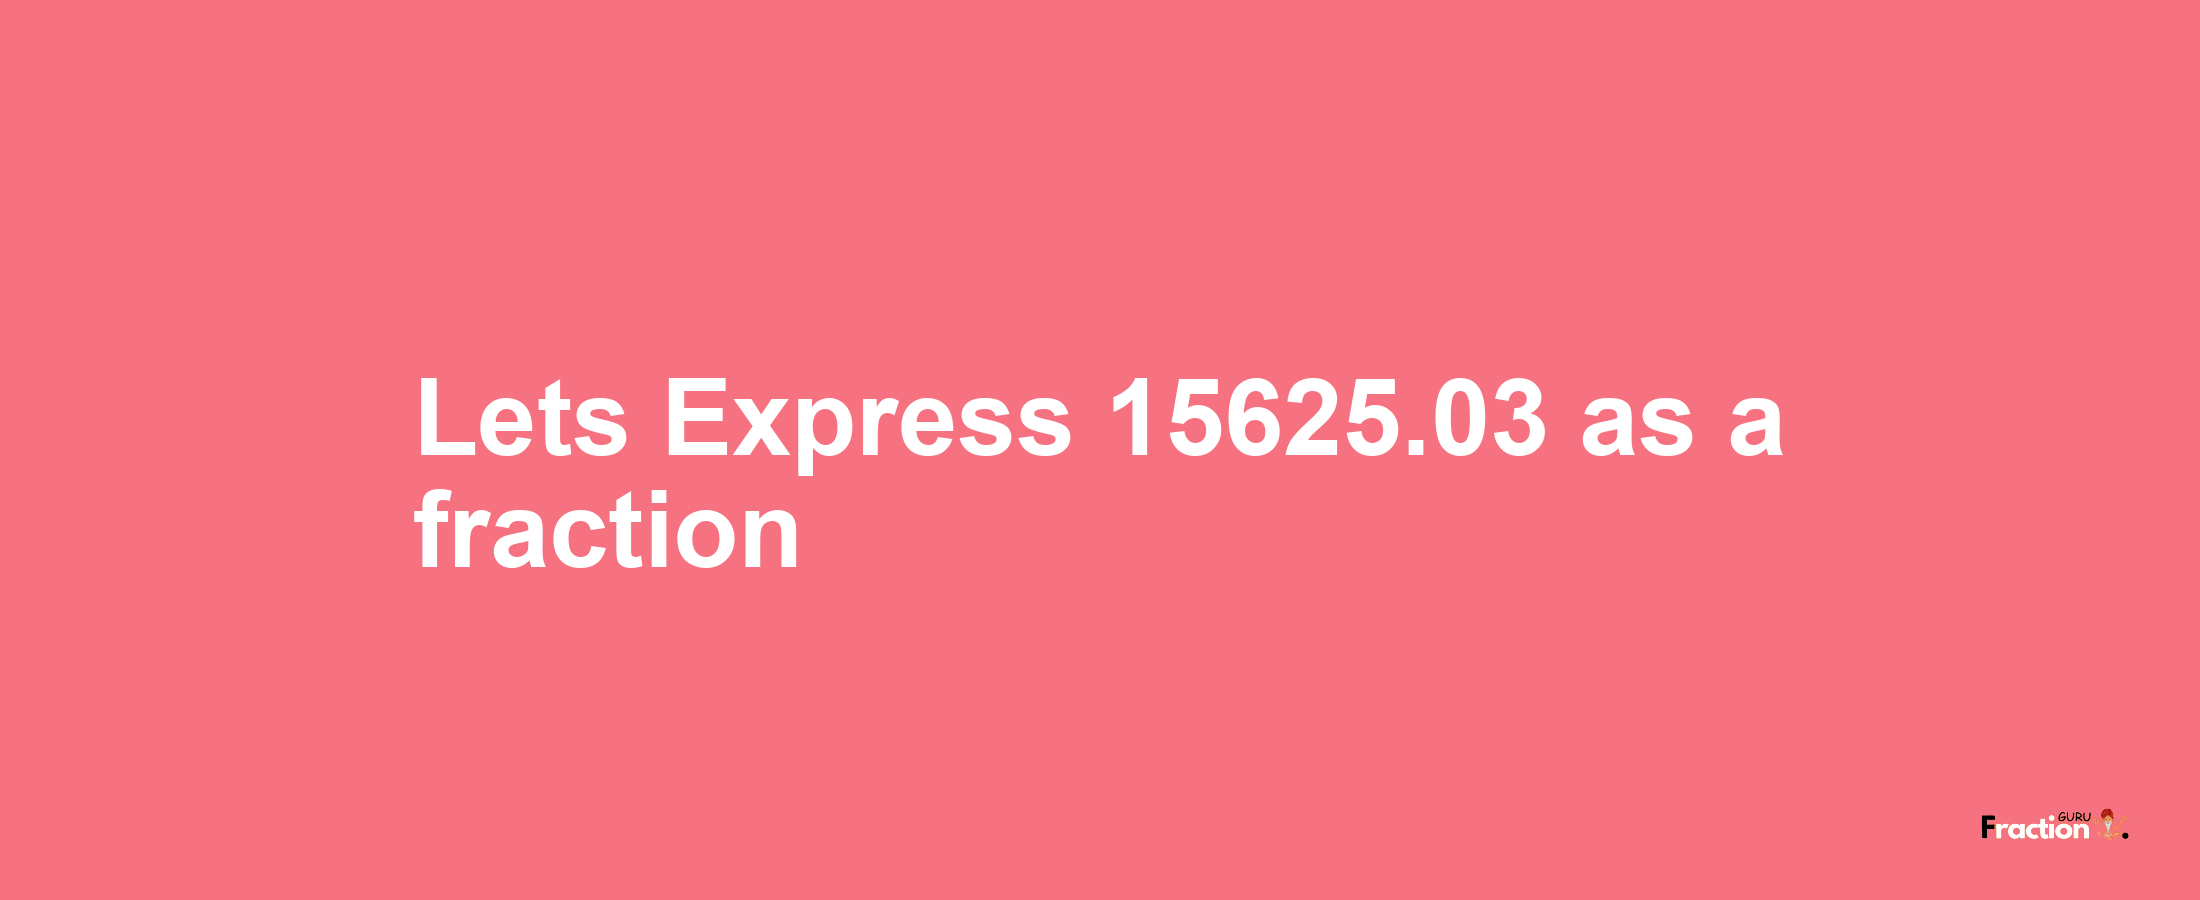 Lets Express 15625.03 as afraction